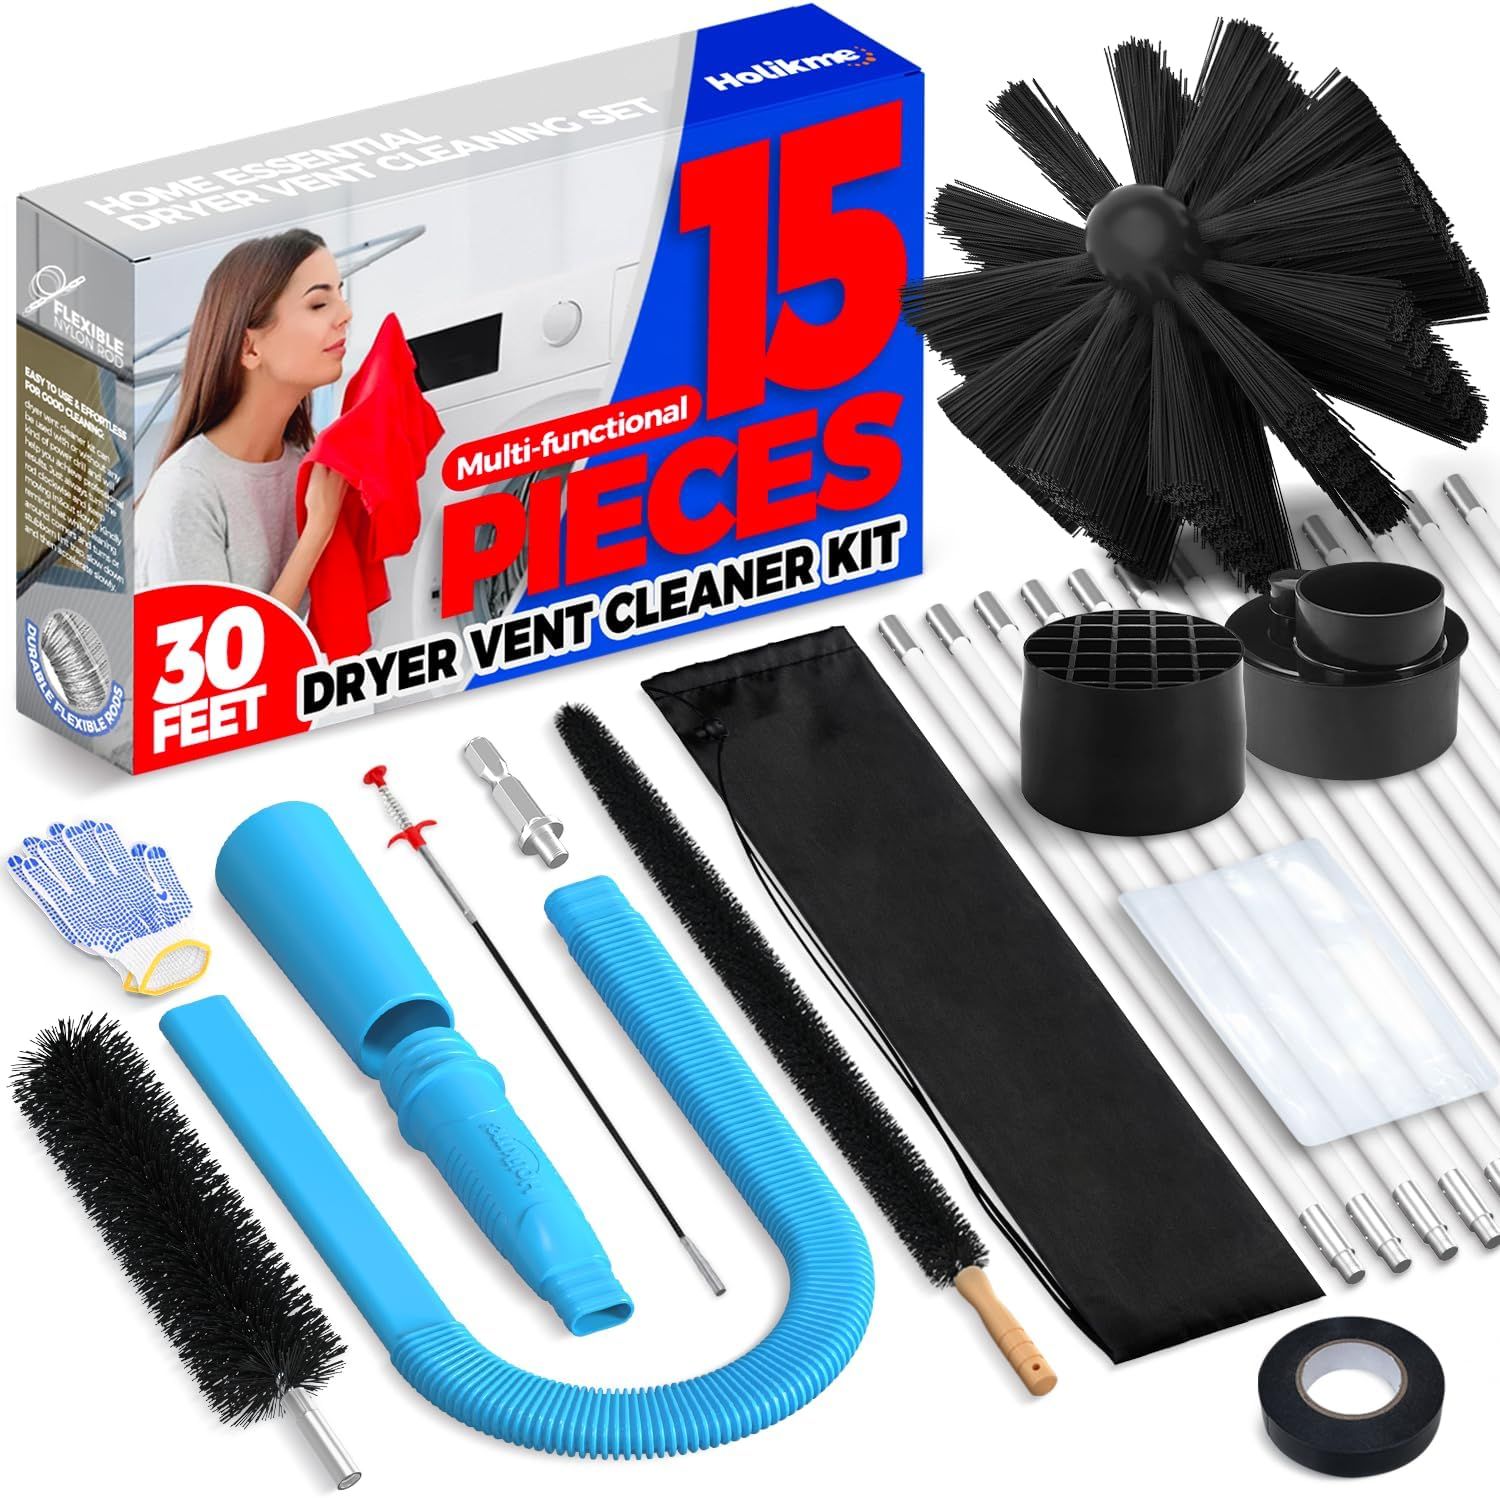 Holikme 11 Pieces Dryer Vent Cleaner Kit Dryer Cleaning Tools, Include 30 Feet Dryer Vent Brush,O... | Amazon (CA)